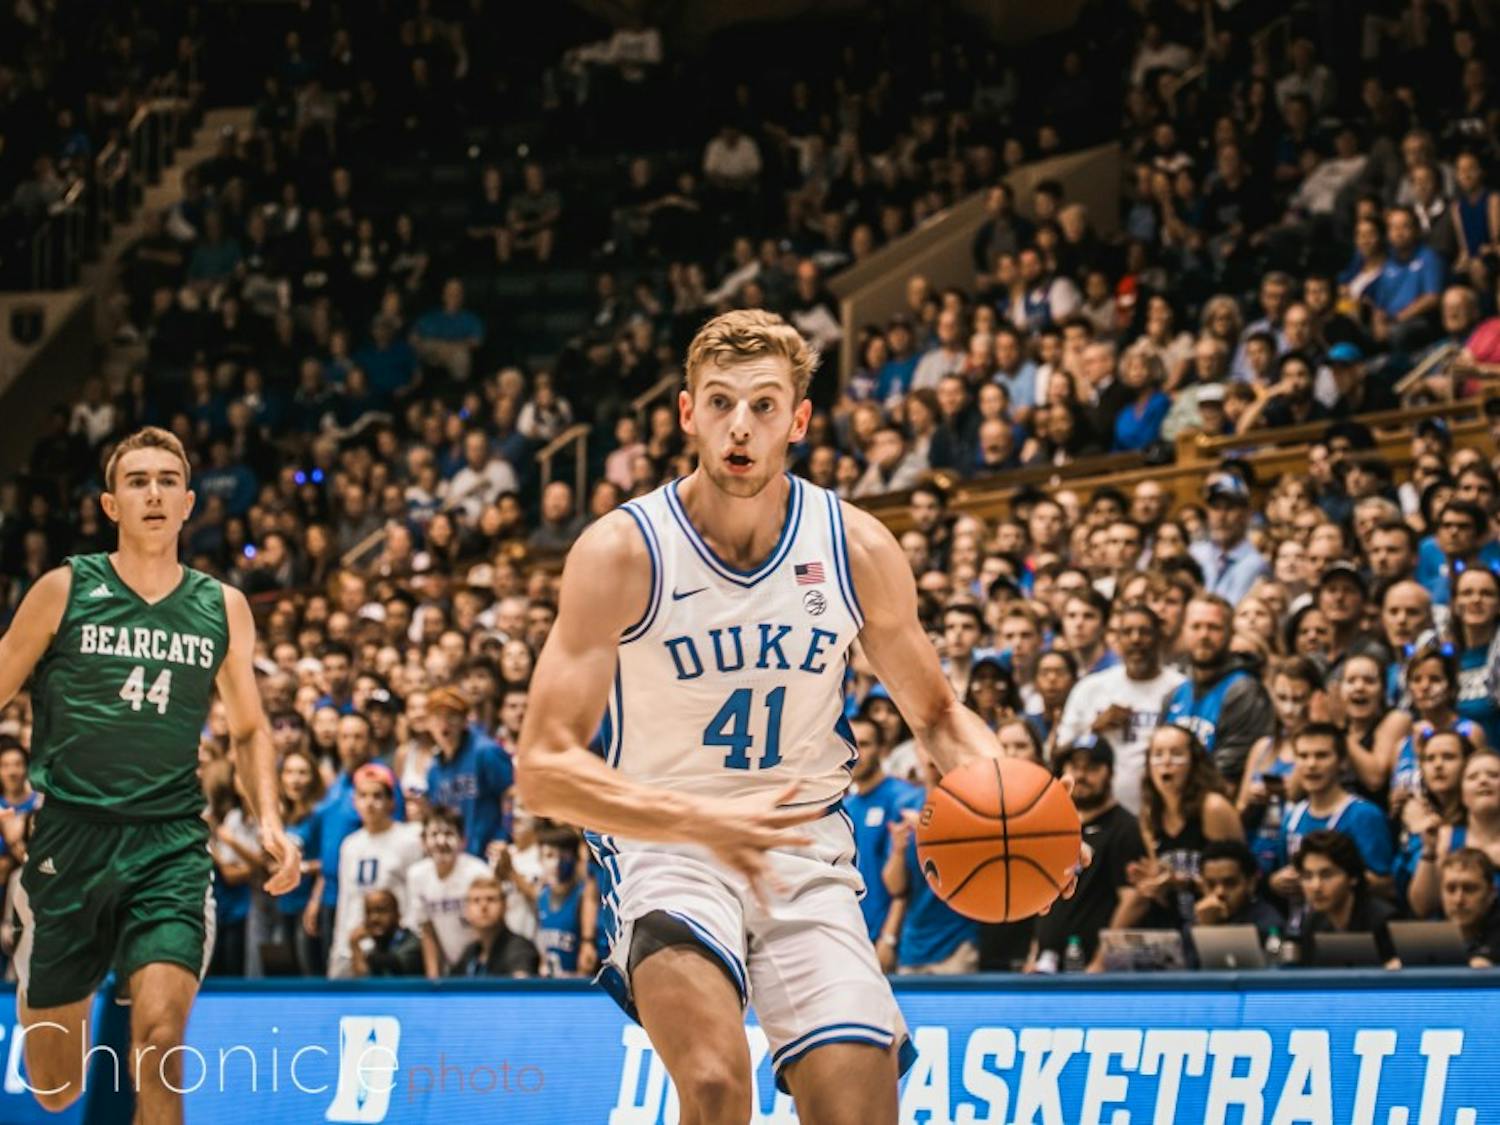 Duke played the Northwest Missouri State University Bearcats at Cameron Indoor Stadium. The Bearcats put on a good show, but the Blue Devils ultimately grabbed the win, the final score being 69-63.&nbsp;